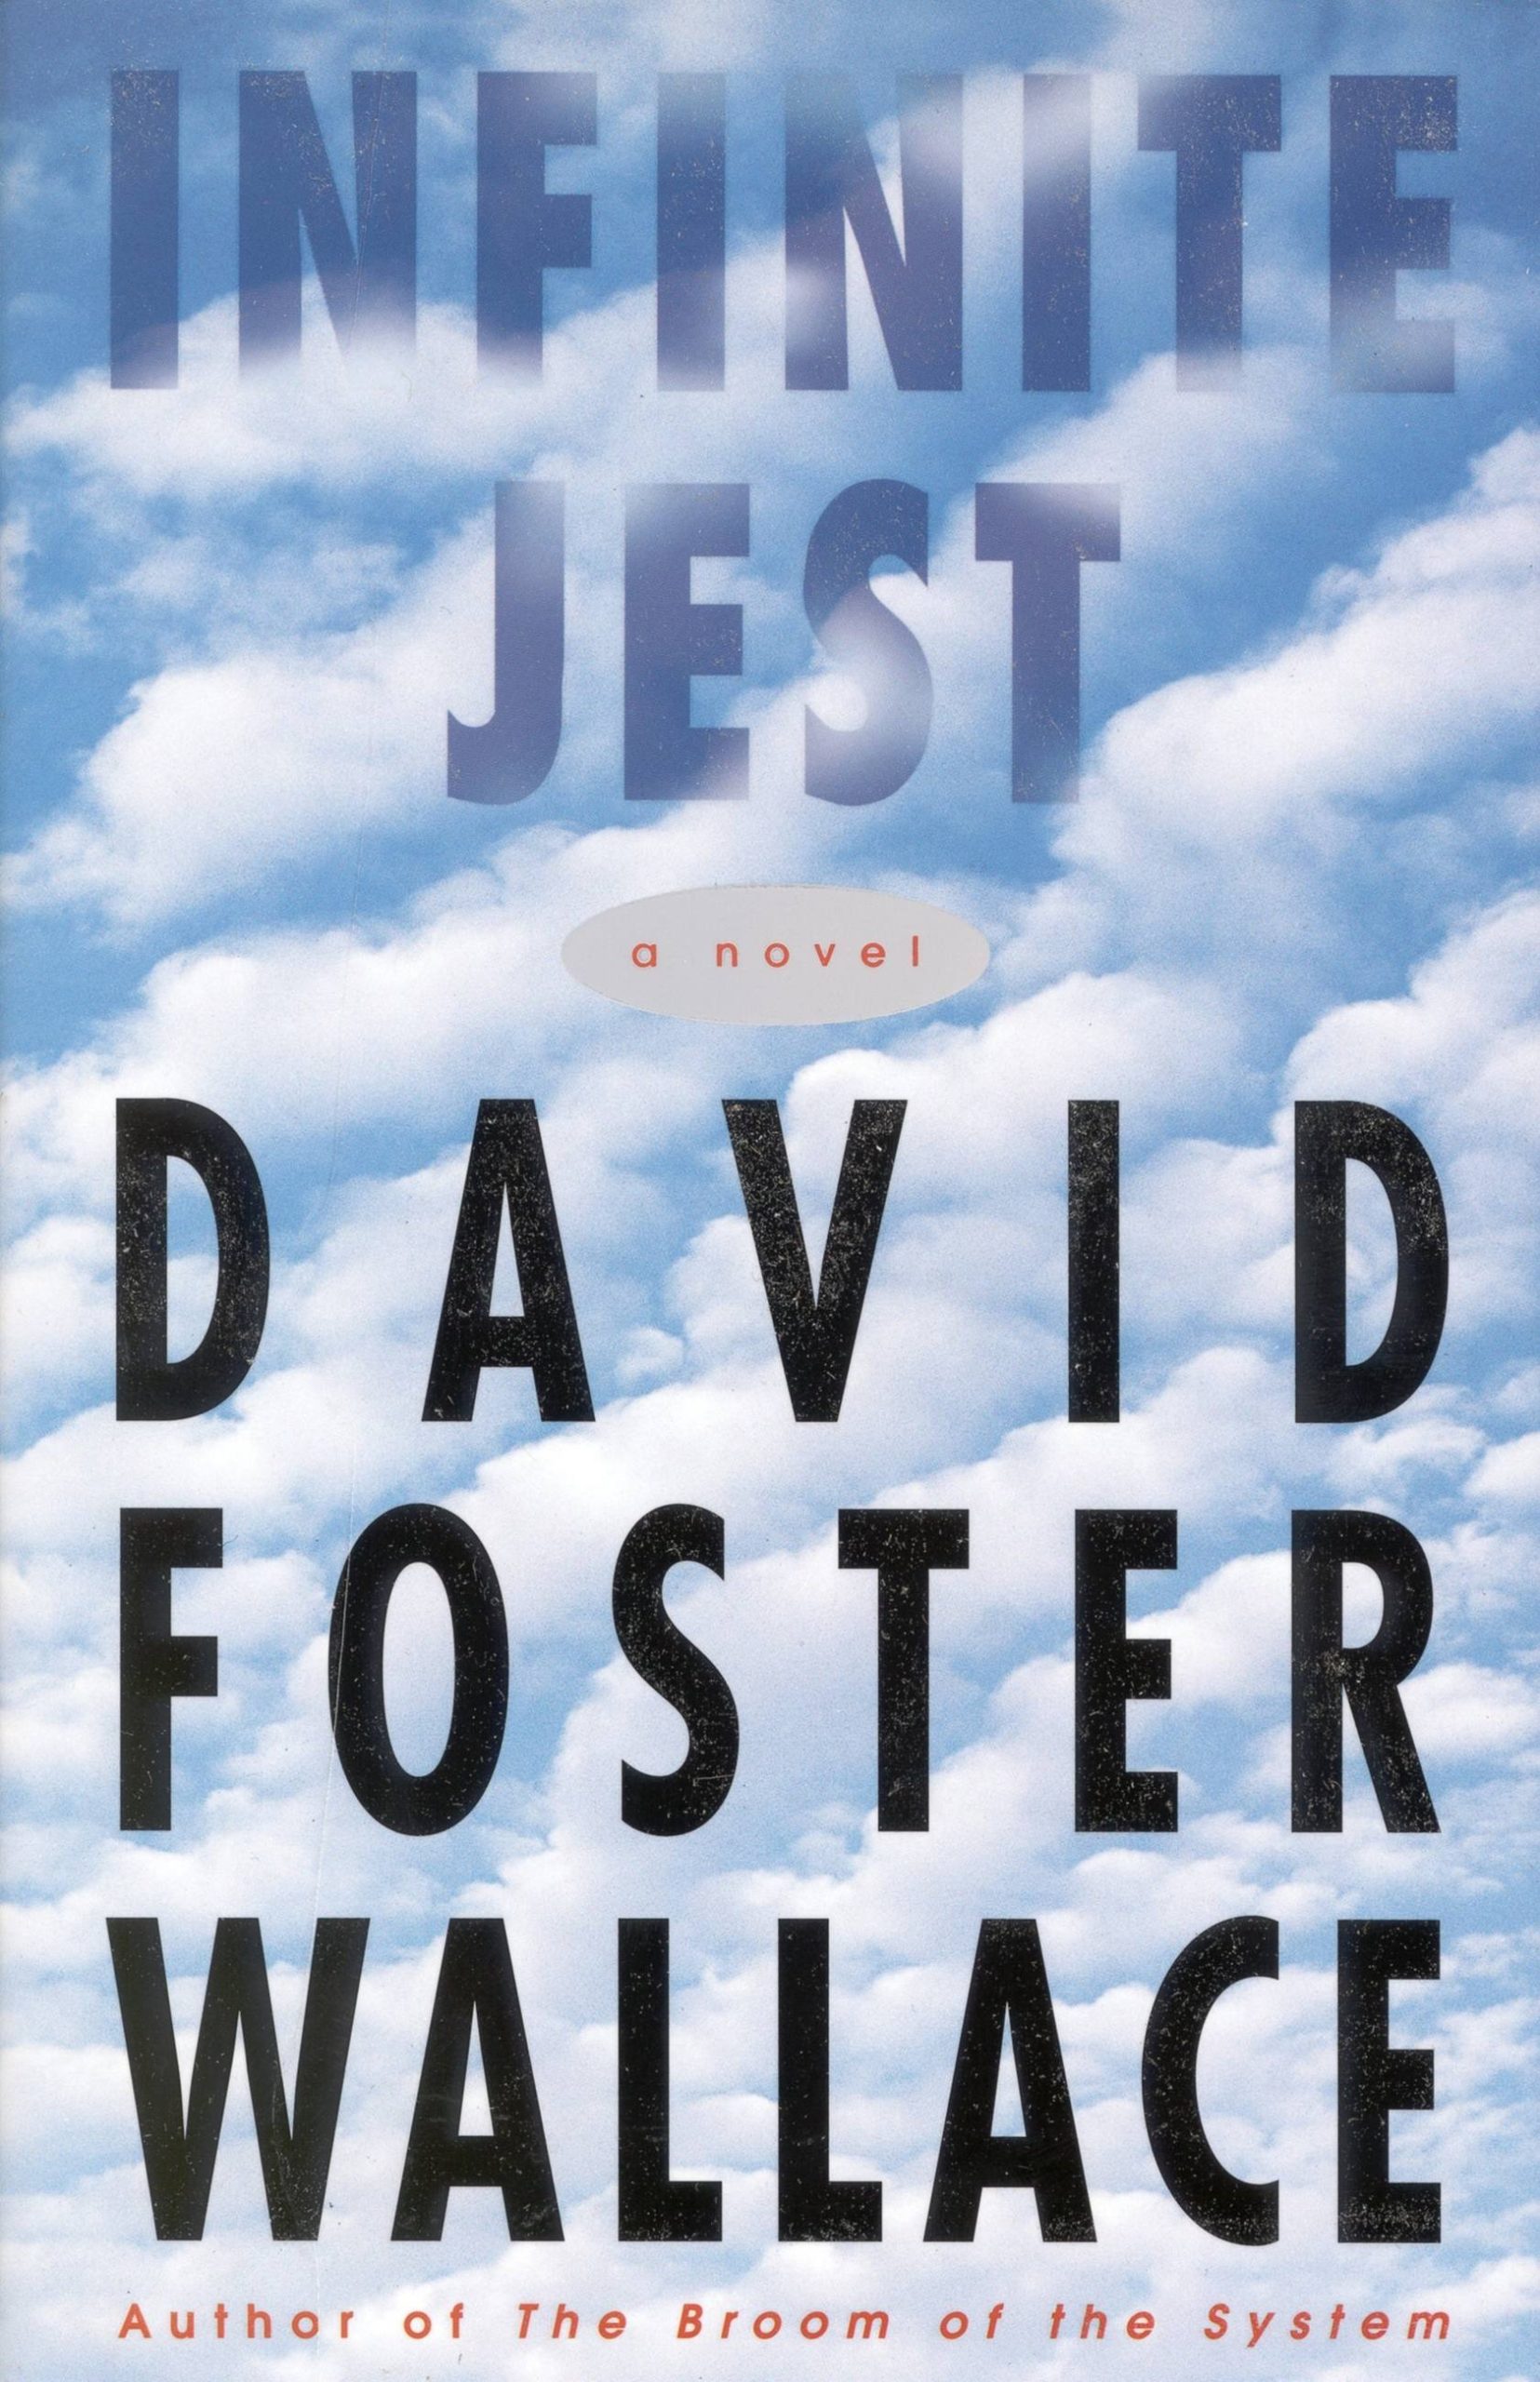 Infinite Jest audiobook renewed the idea of what a novel can do